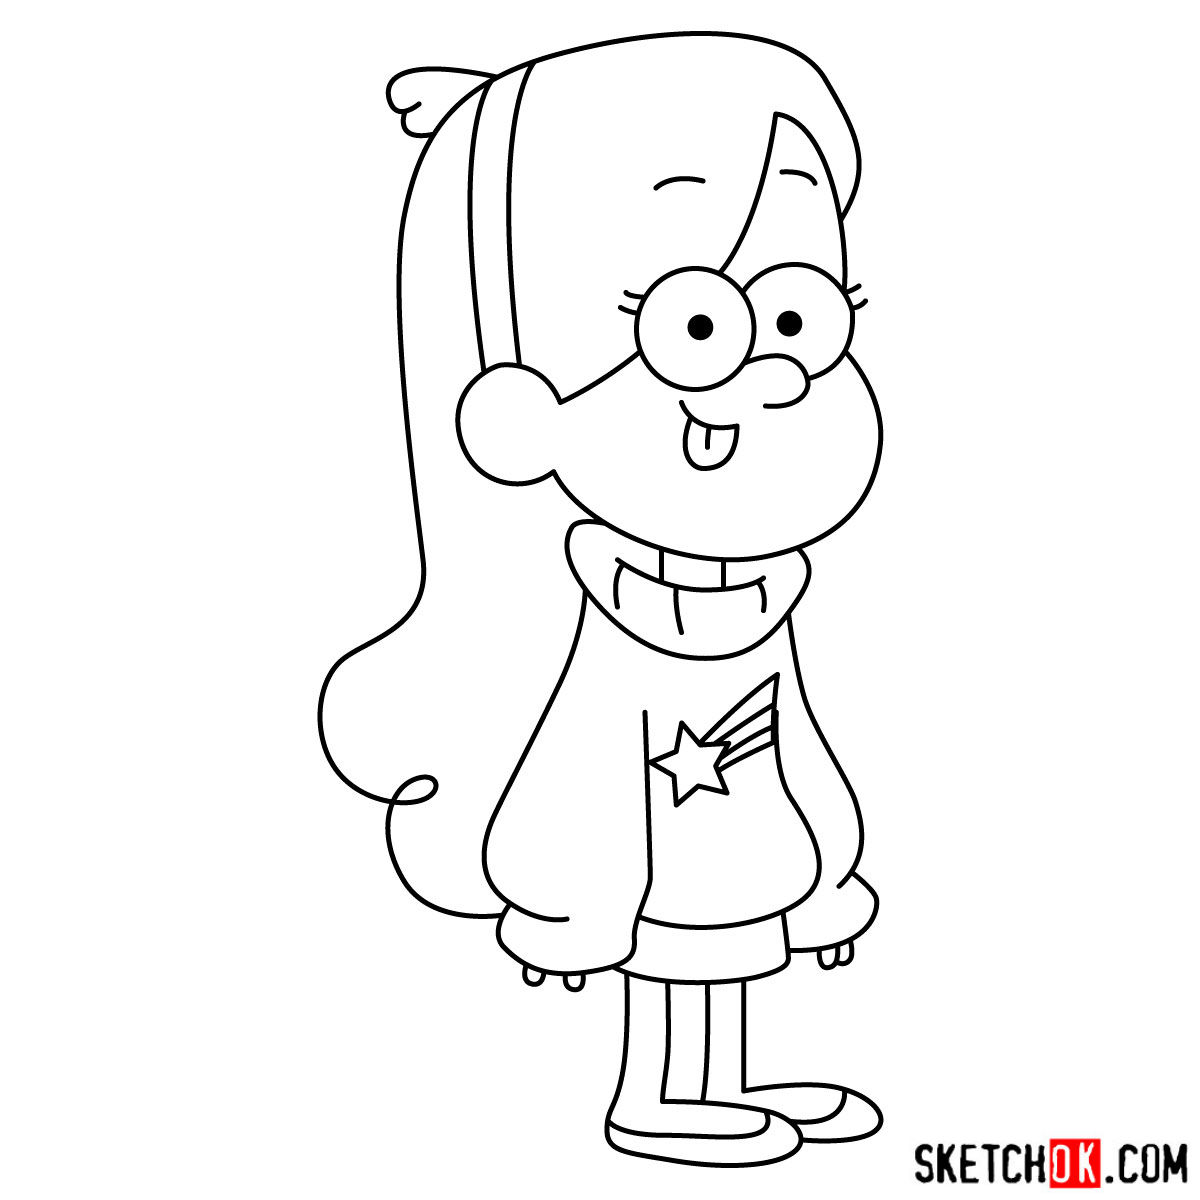 How to draw Mabel Pines Sketchok easy drawing guides